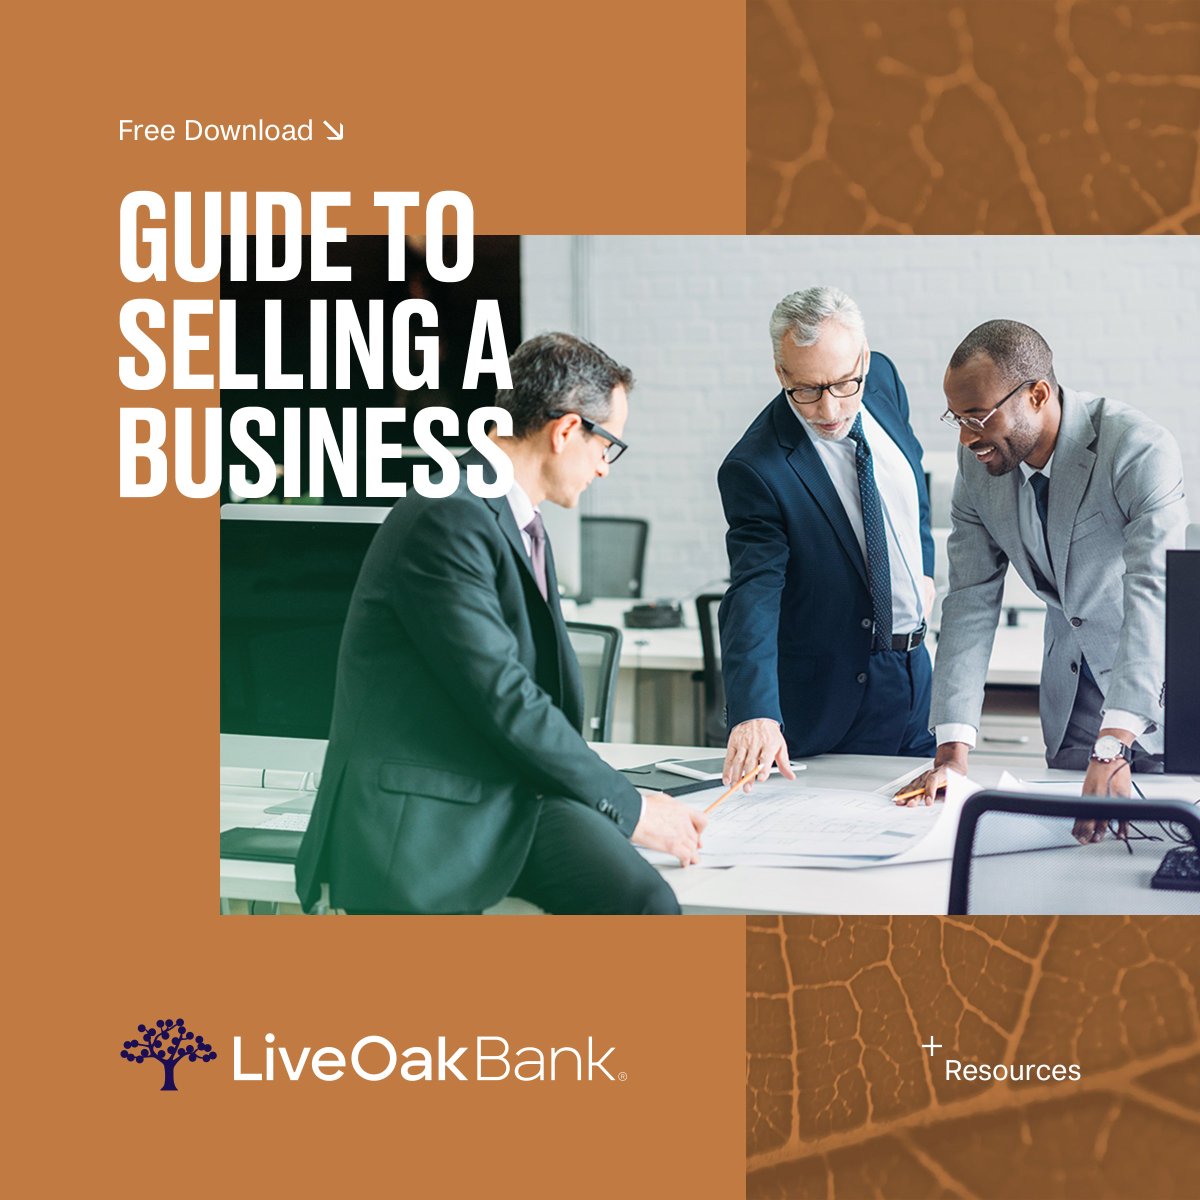 Through our years of industry experience, the team at Live Oak has learned a thing or two about what makes a succession successful. Explore our complete guide to selling your business: bit.ly/3UnMybN Member FDIC.